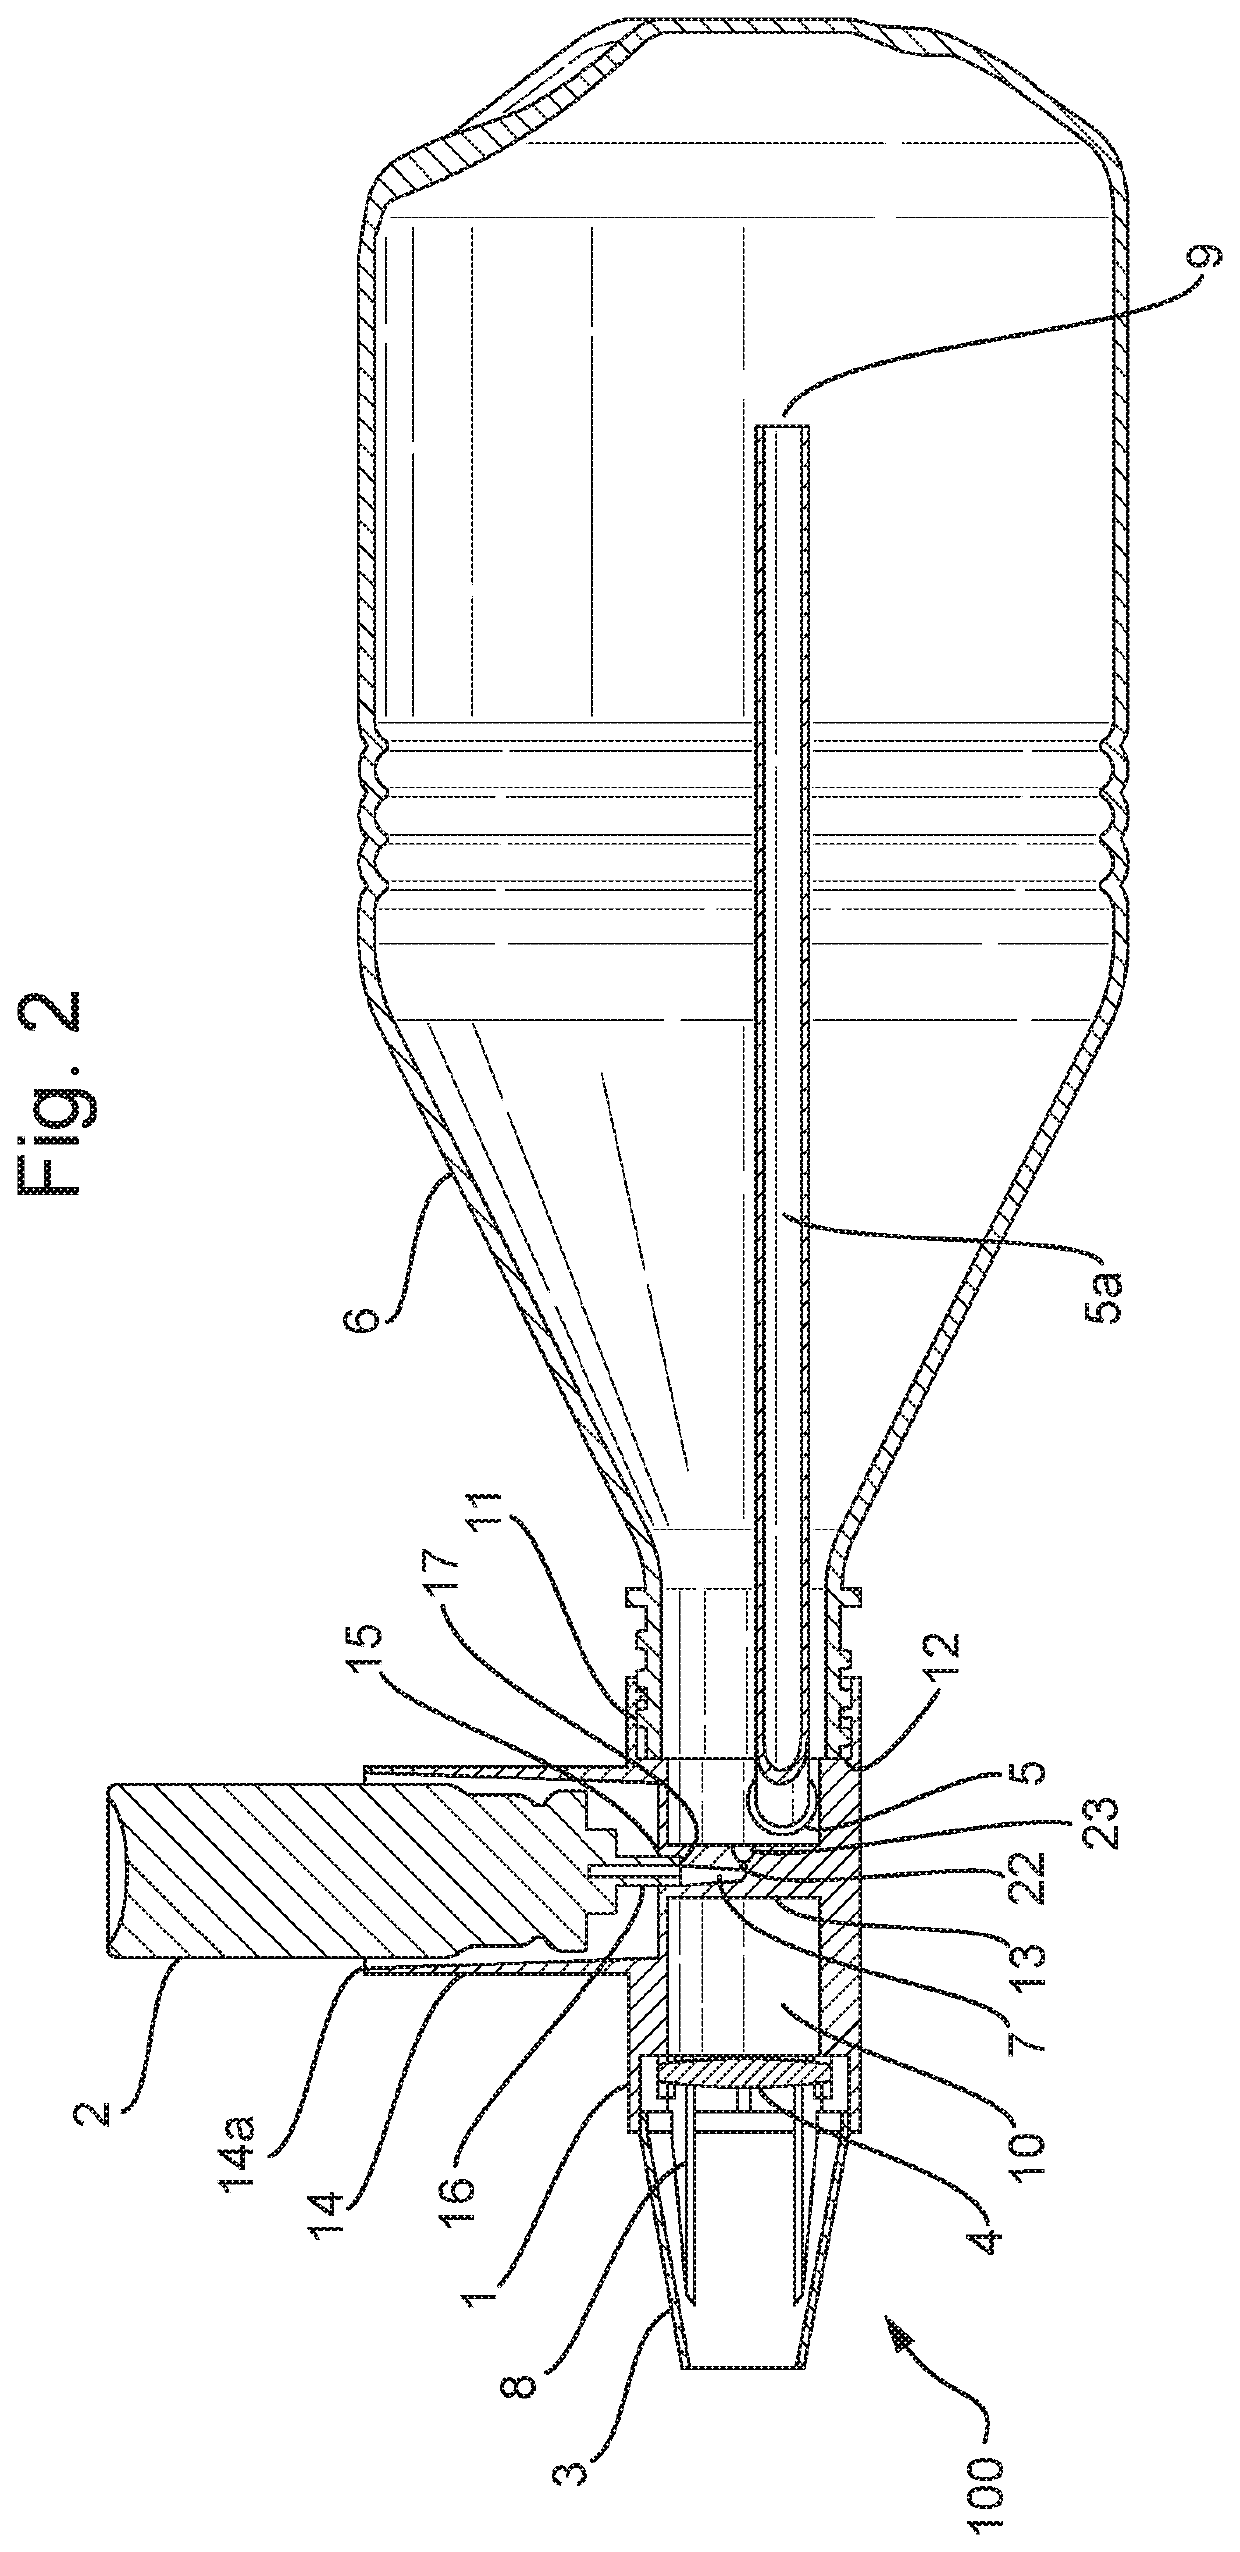 A device for increasing the efficacy of a metered dose inhaler